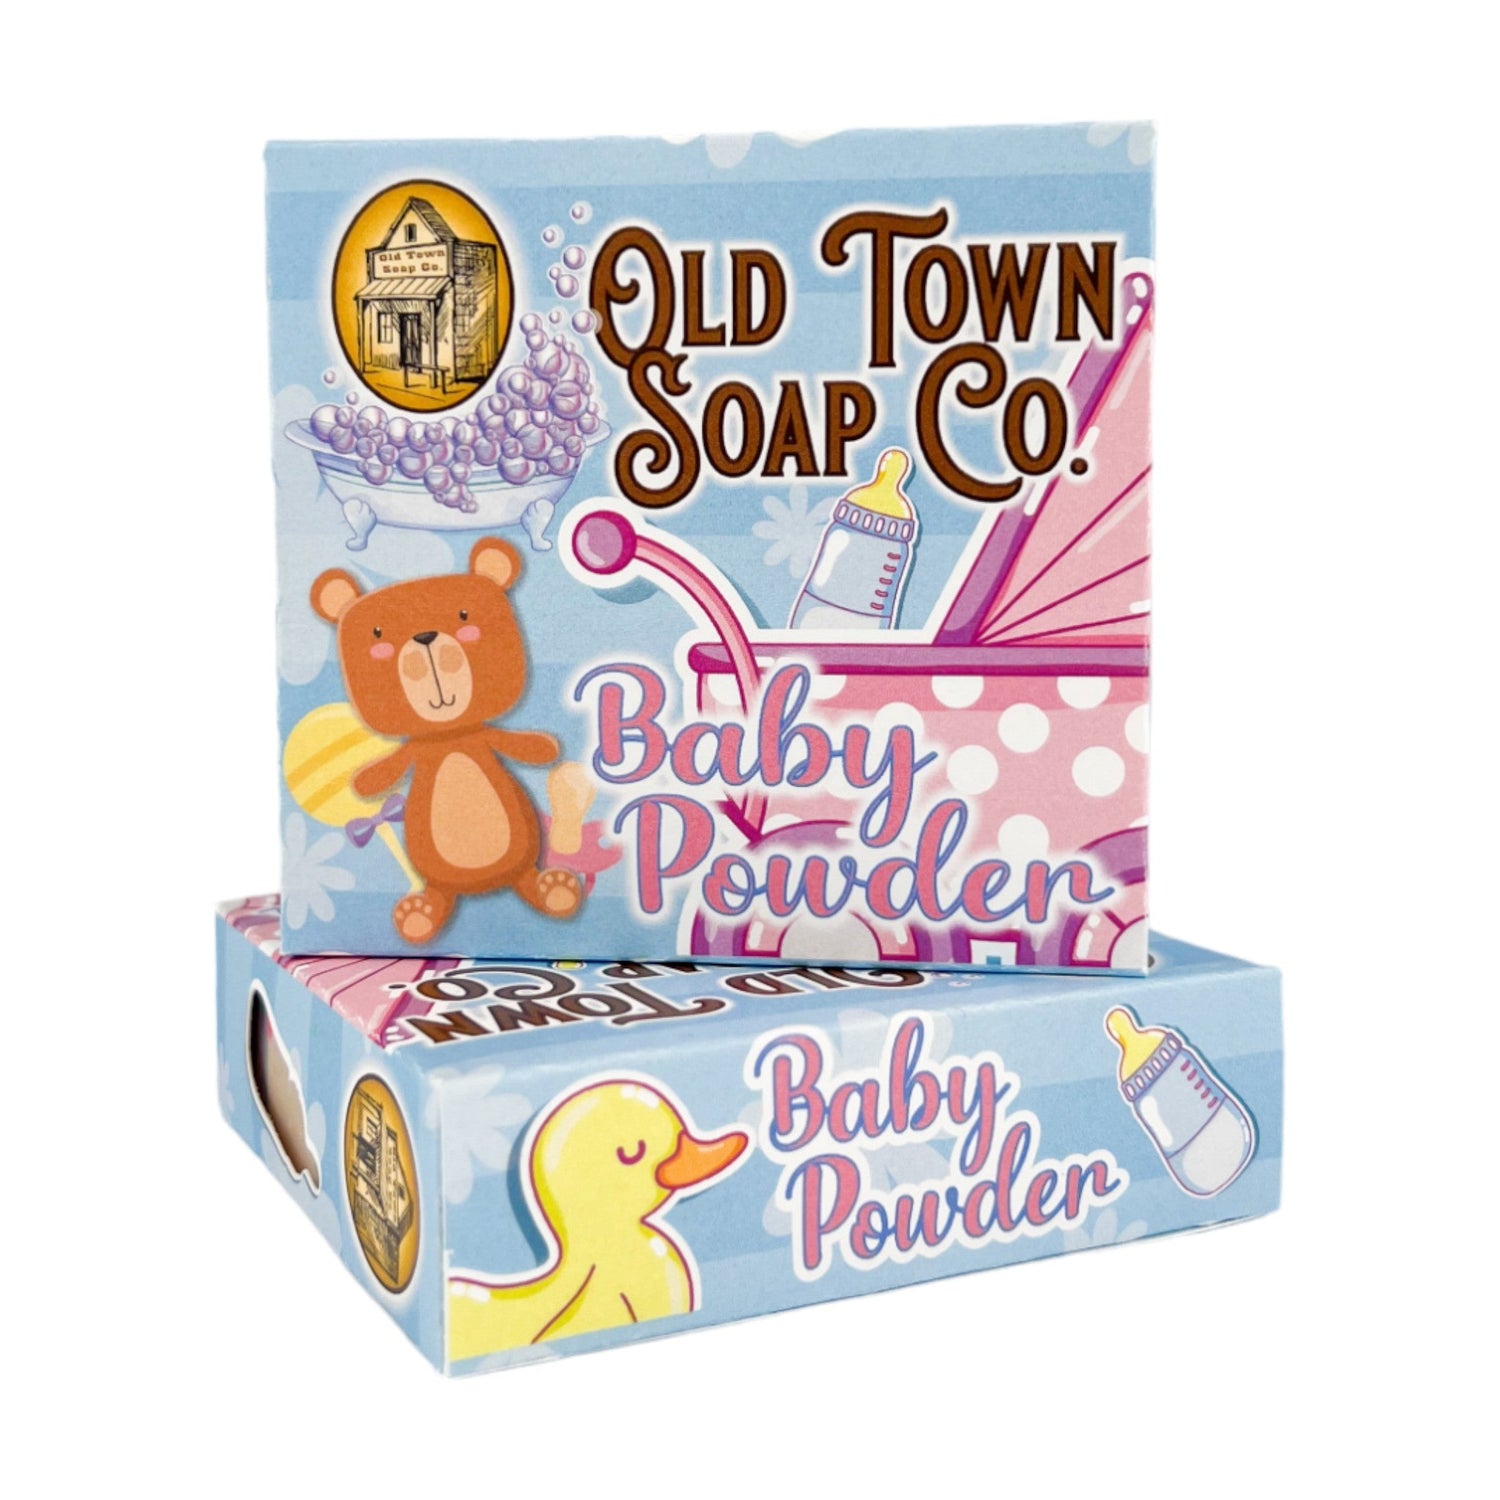 Baby Powder -Bar Soap - Old Town Soap Co.